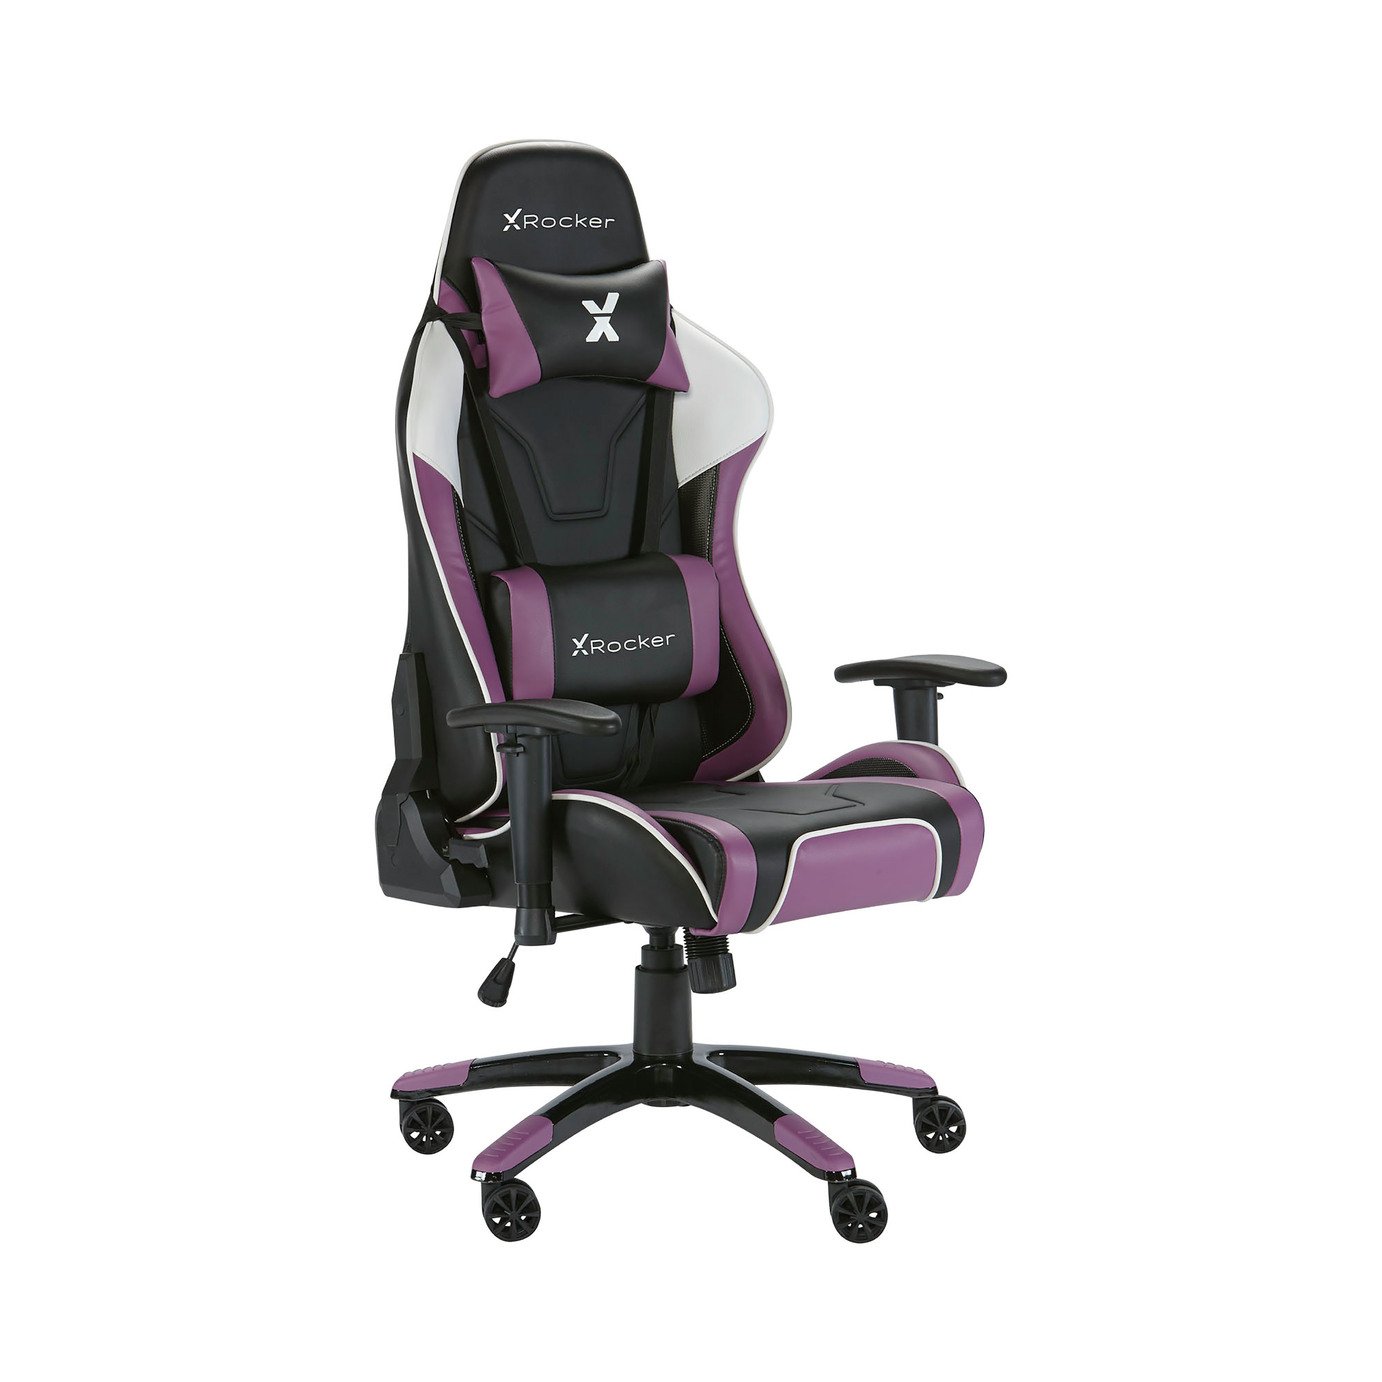 X Rocker Agility Sport Office Gaming Chair Review